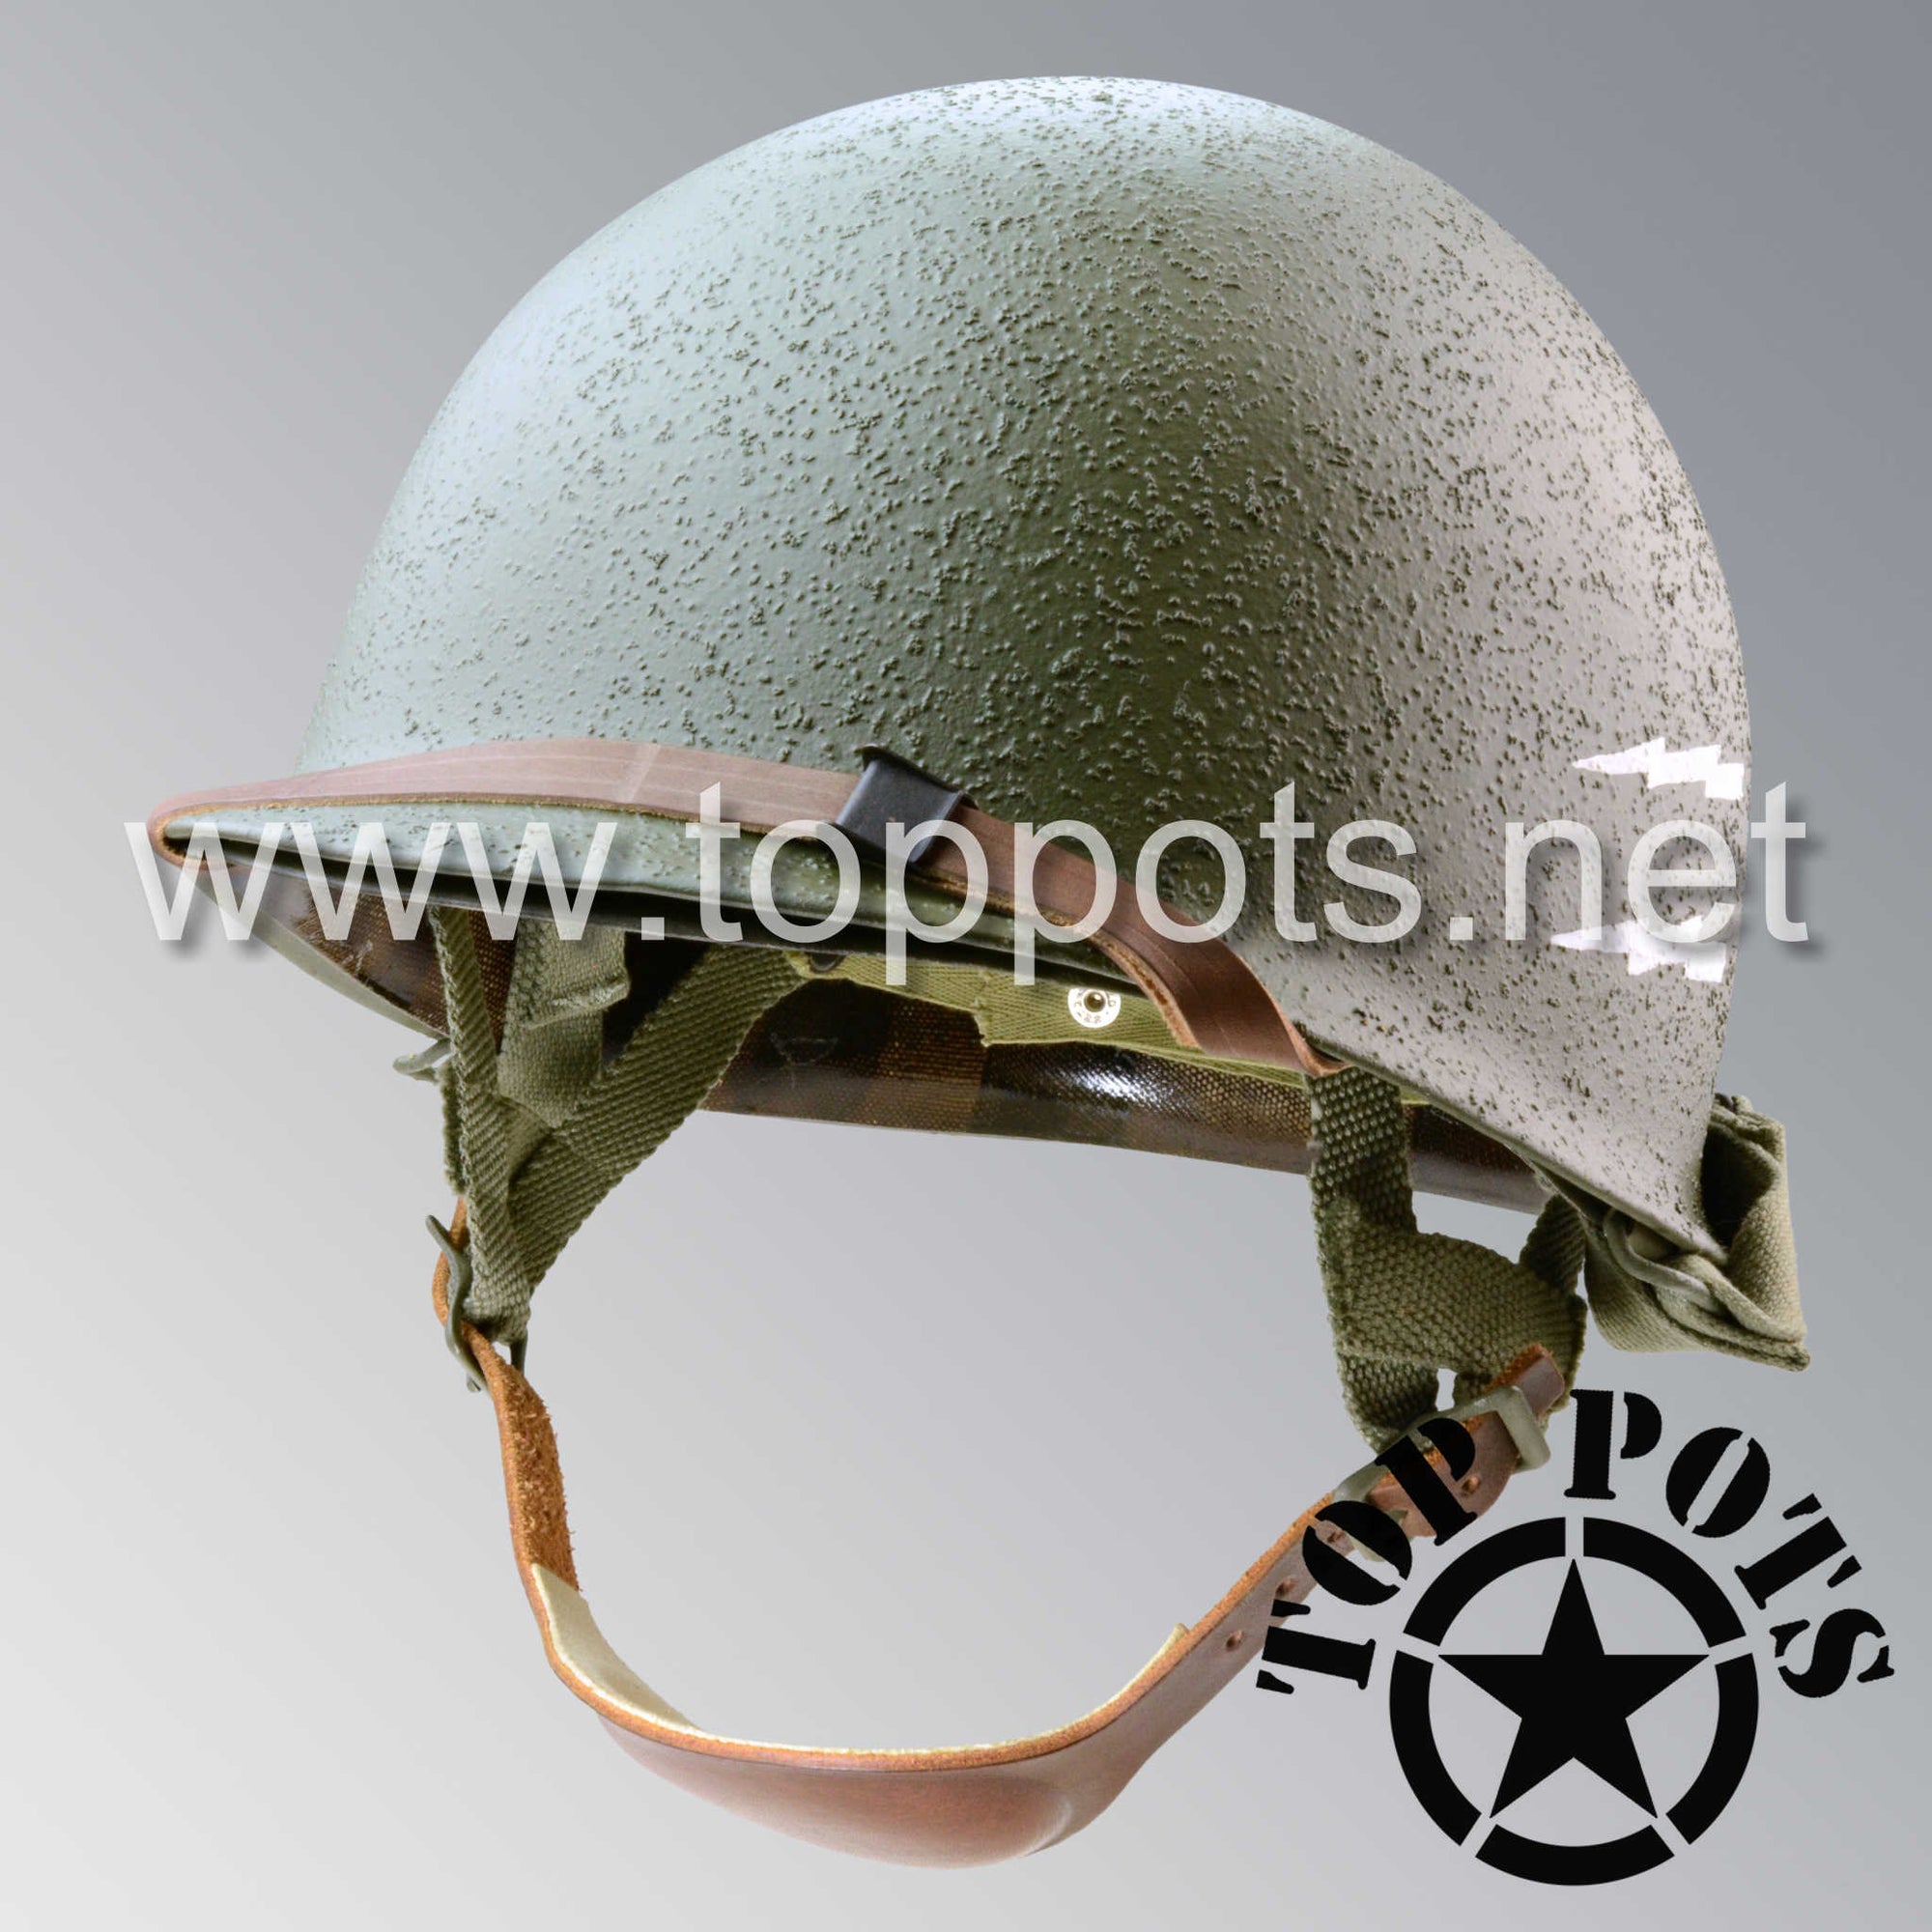 WWII US Army Restored Original M1C Paratrooper Airborne Helmet Swivel Bale Shell and Liner with 508th PIR Emblem